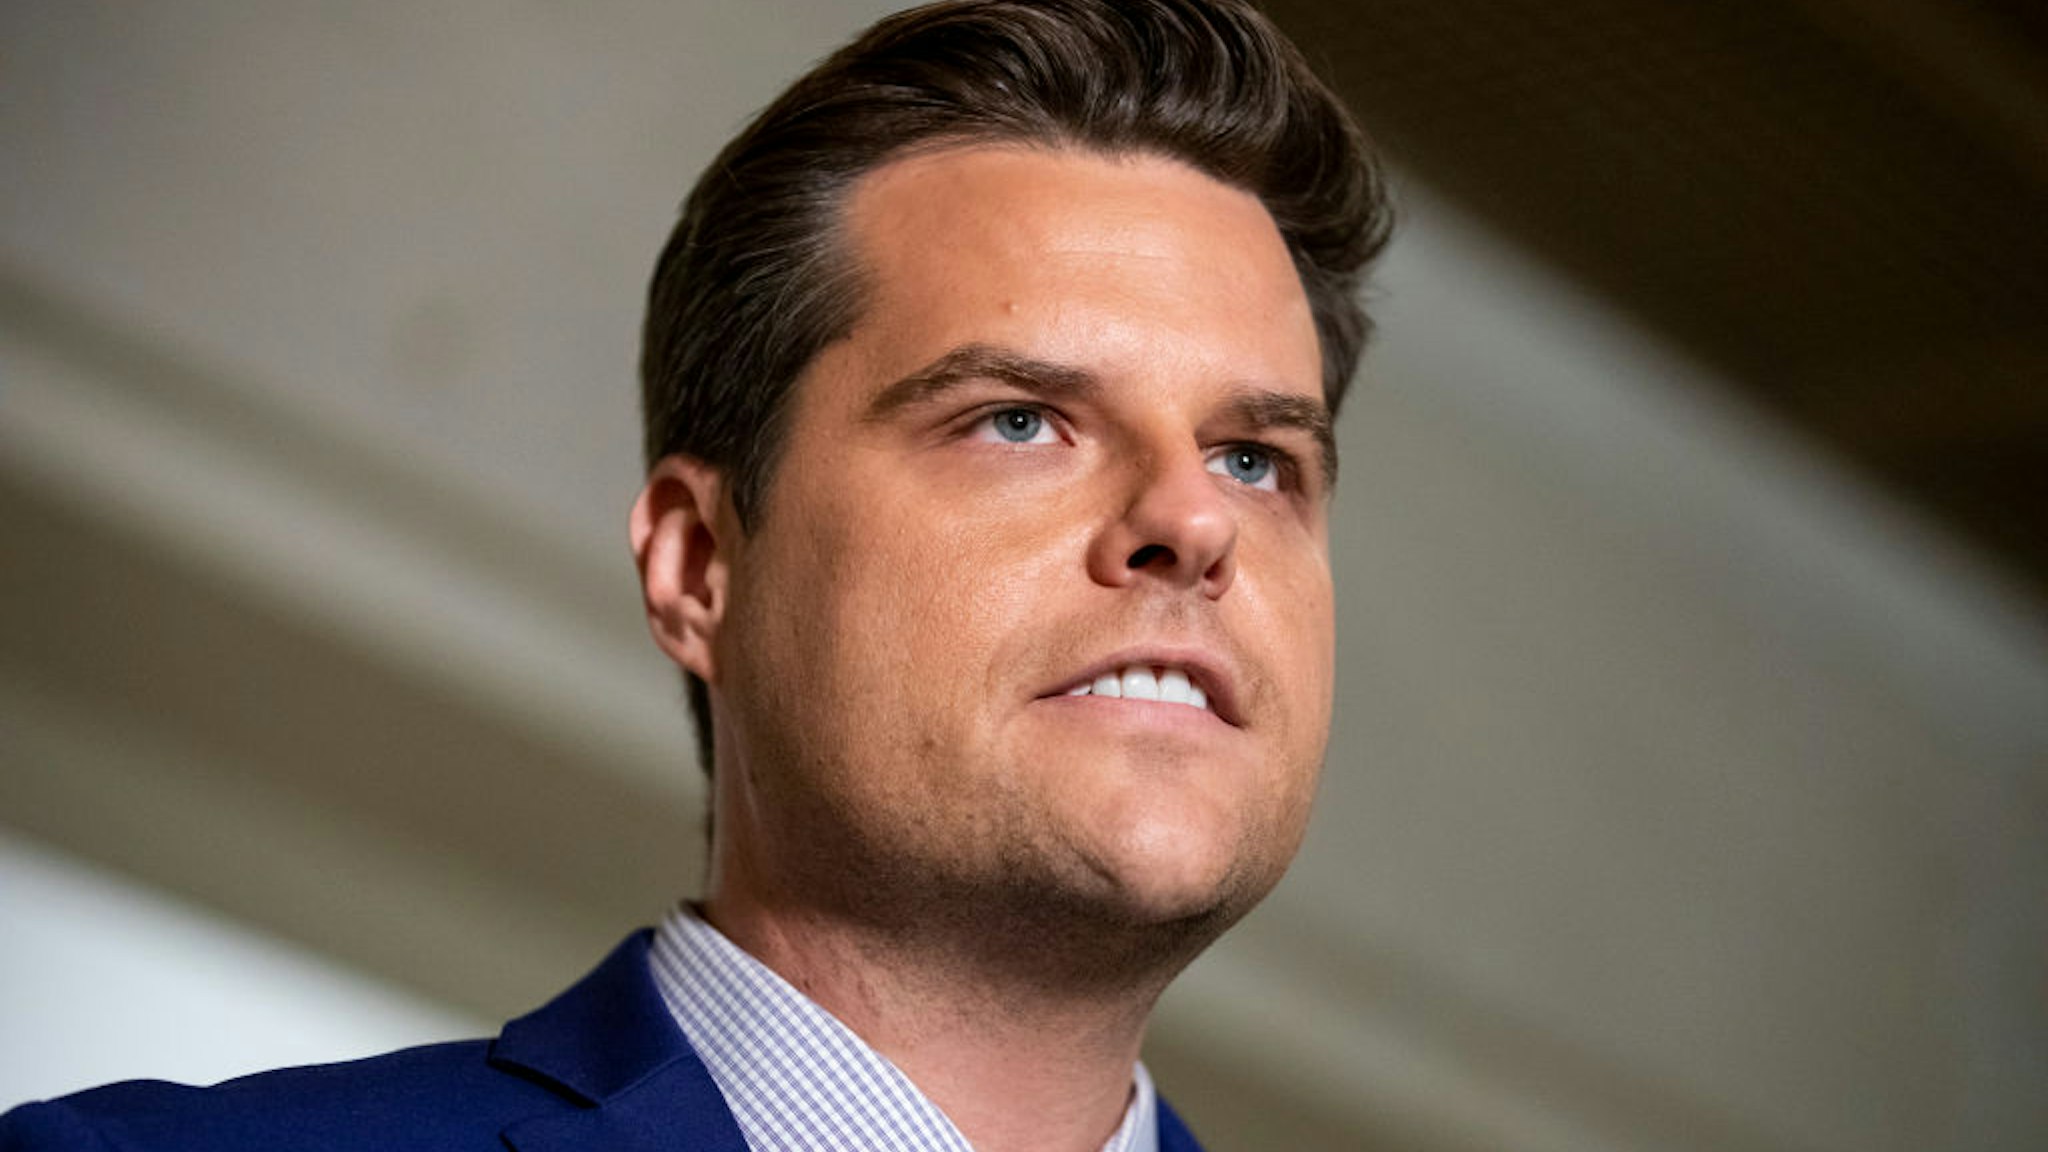 Matt Gaetz speaks to the media outside of the Sensitive Compartmented Information Facility